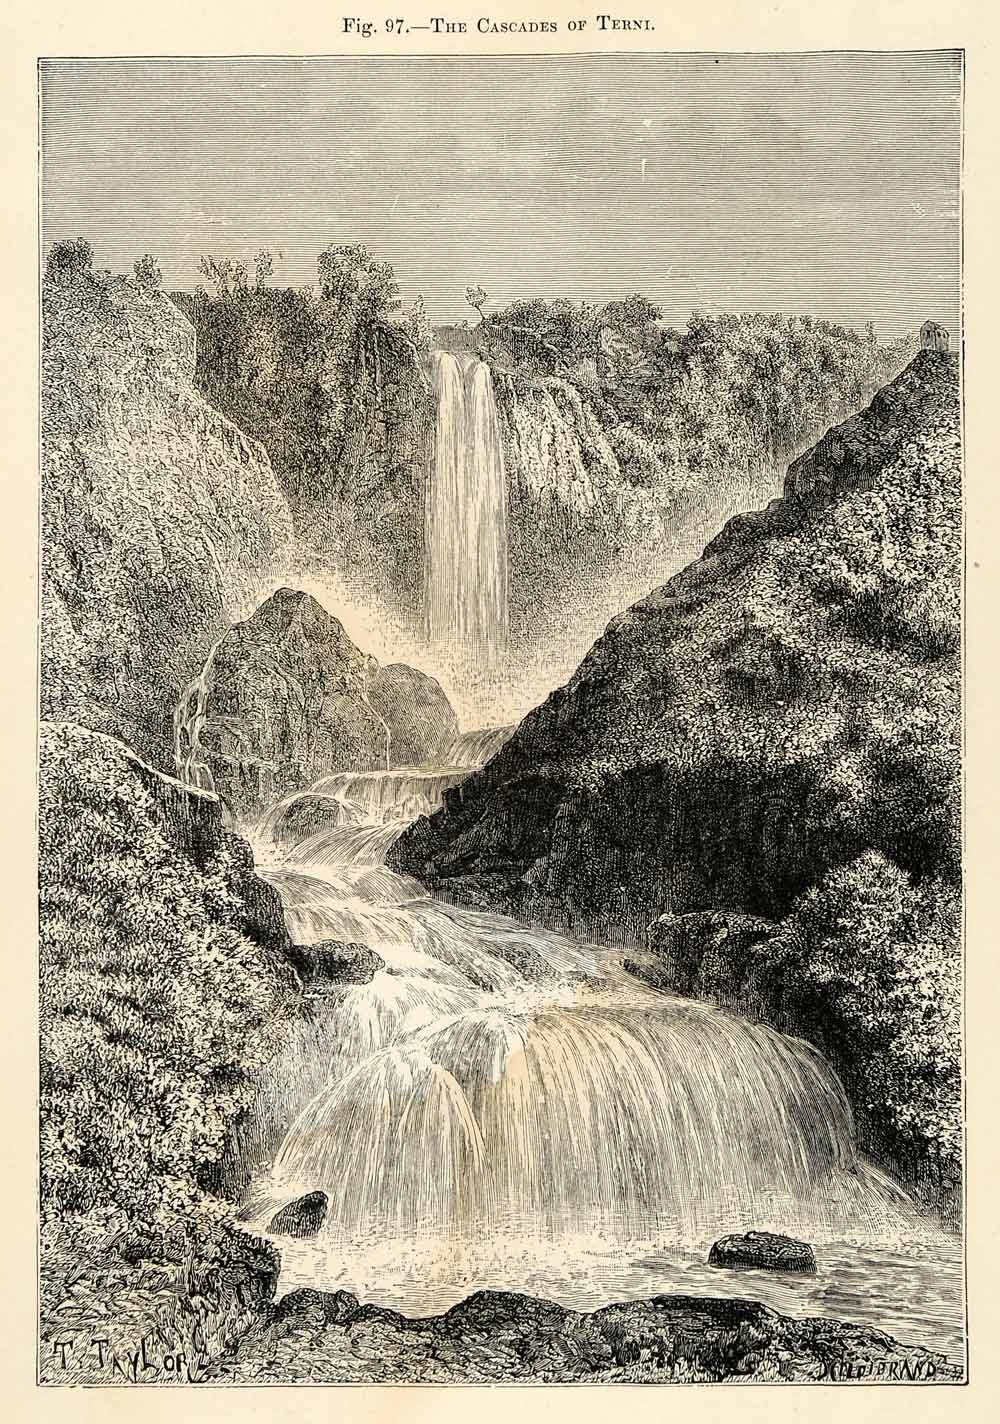 1882 Wood Engraving Cascades Terni Umbria Italy Nera River Waterfall Bluff XGS6